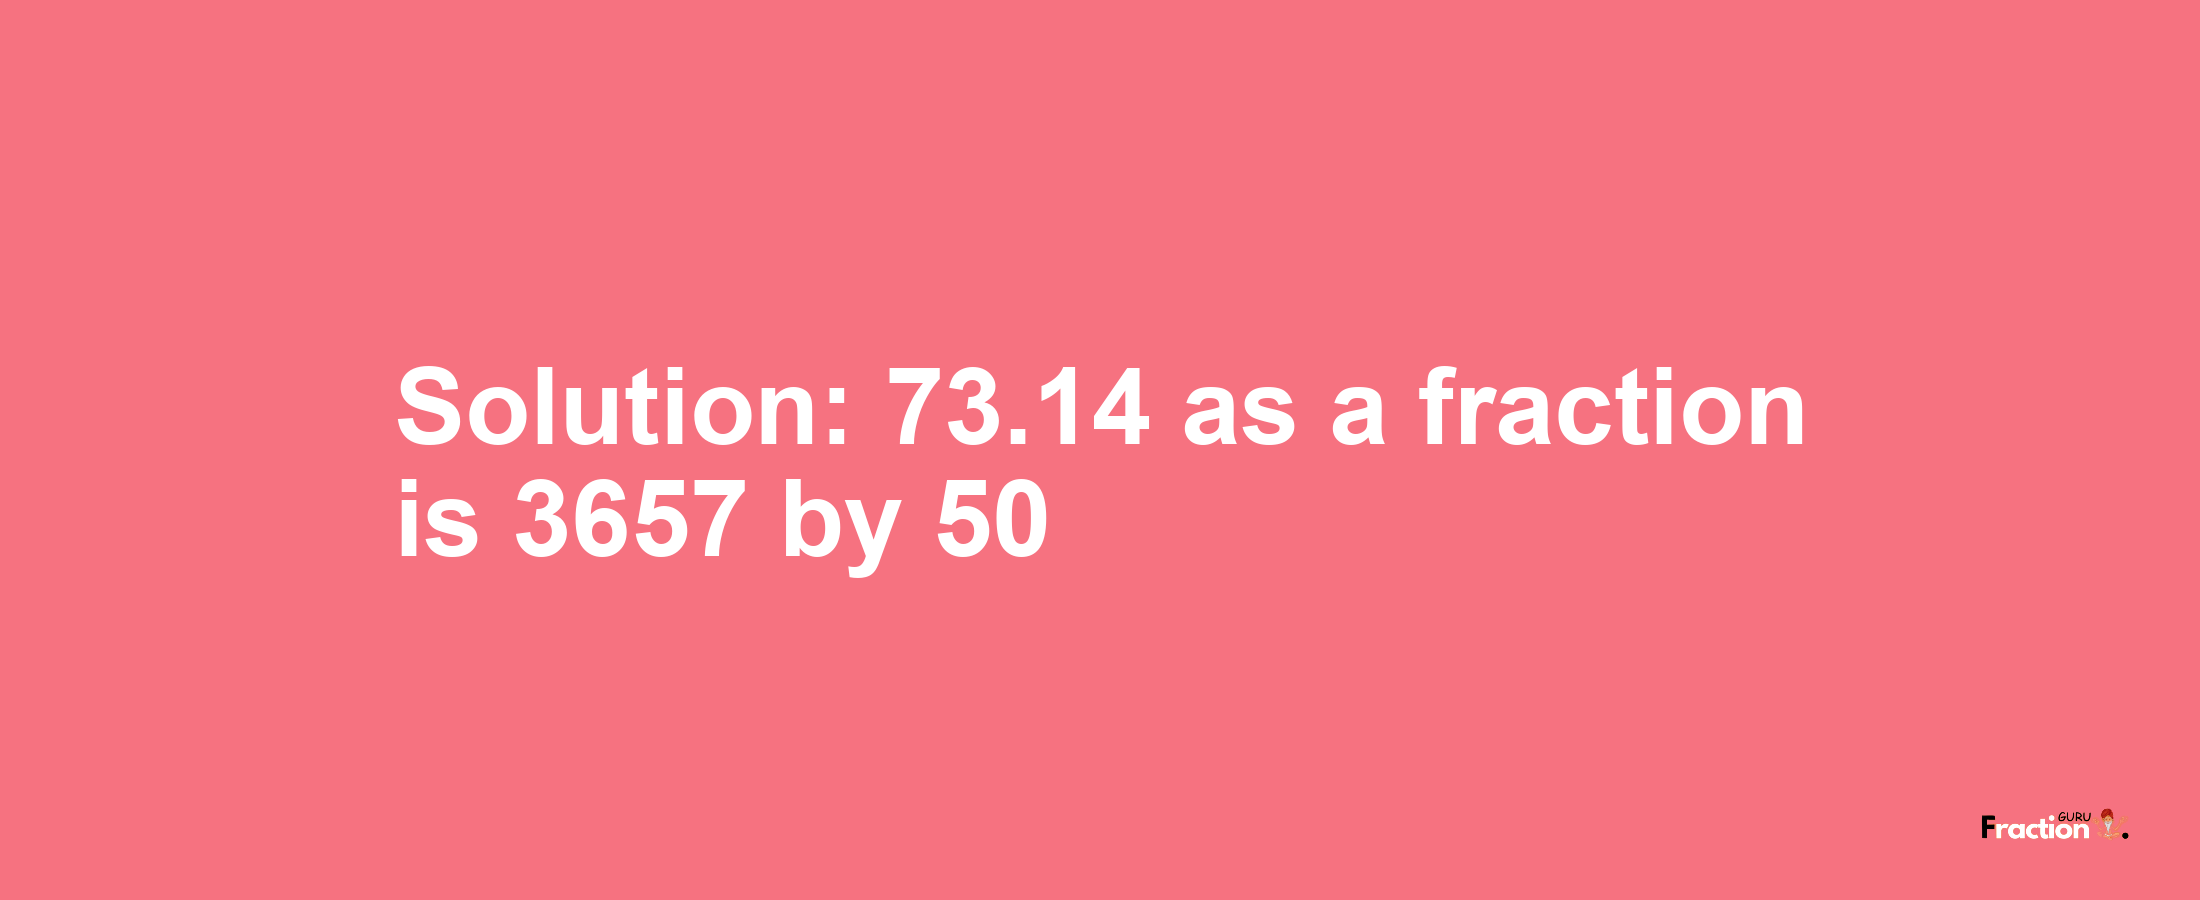 Solution:73.14 as a fraction is 3657/50